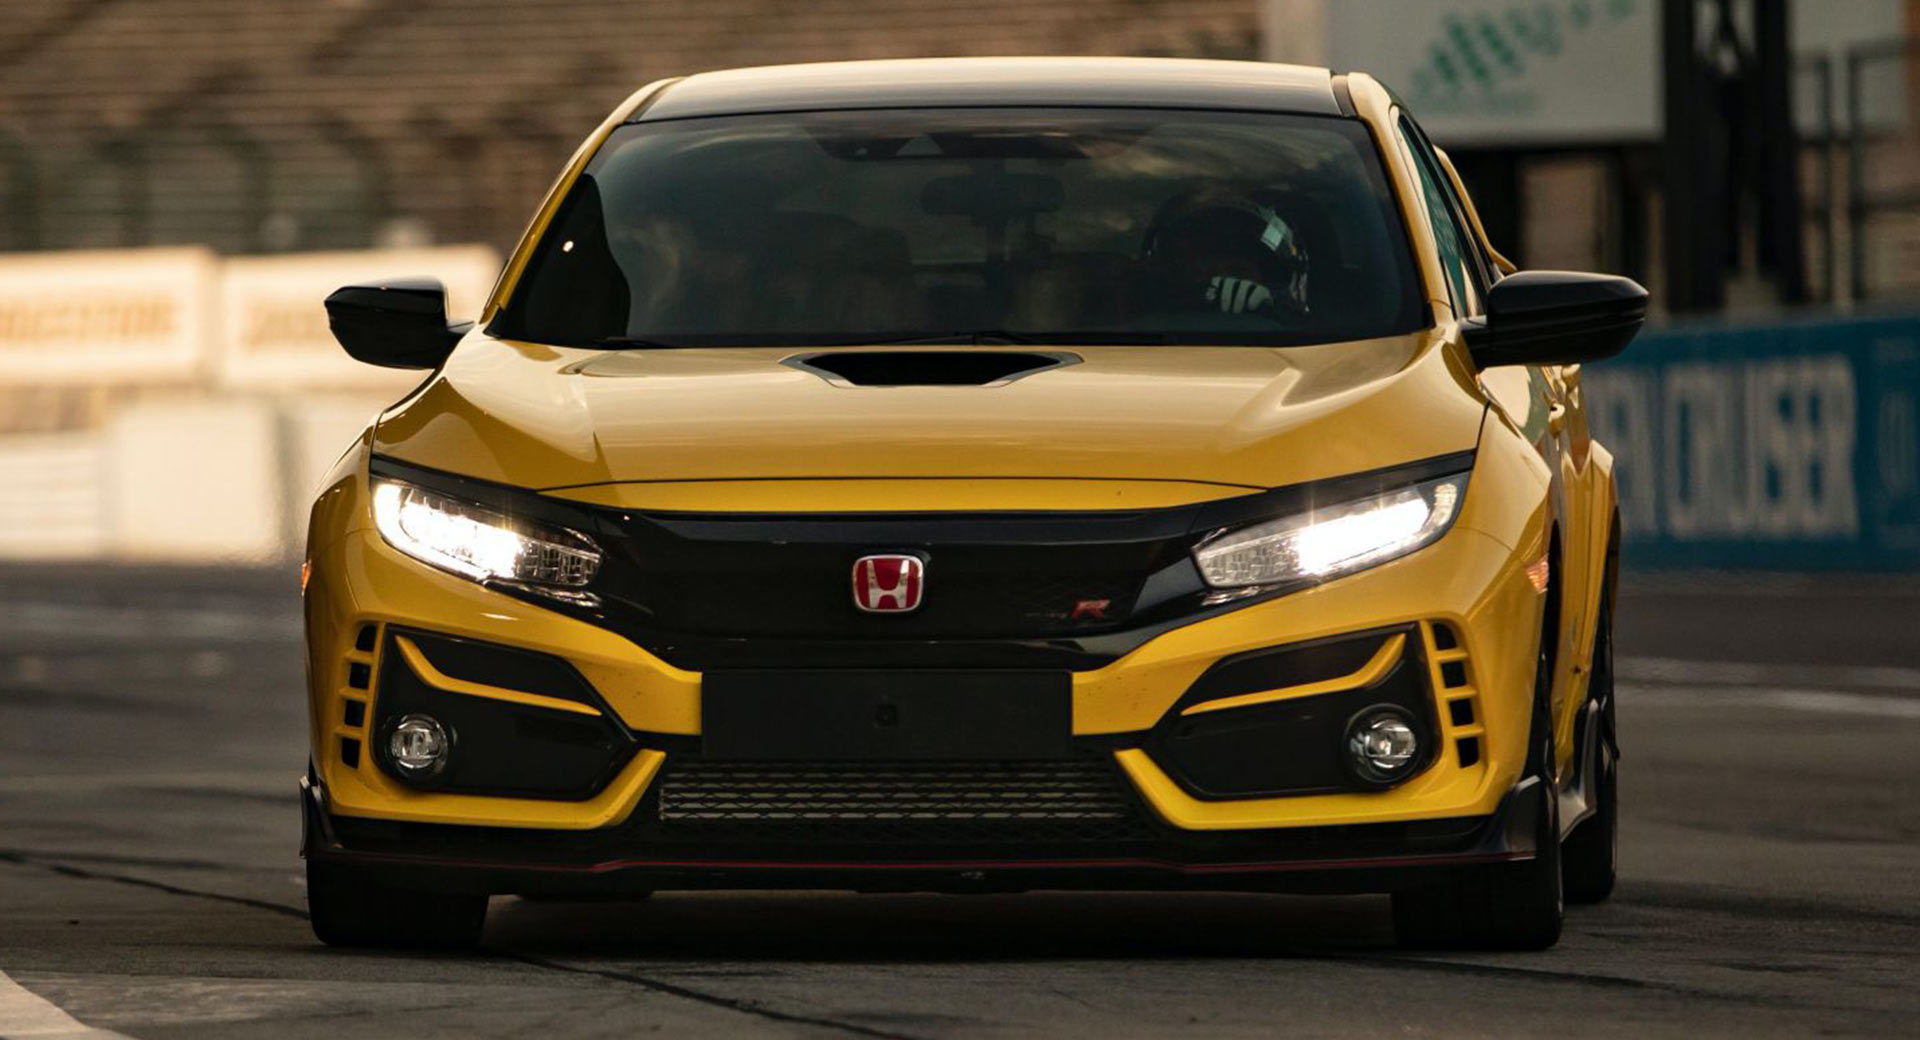 Watch In Awe As 21 Honda Civic Type R Limited Edition Hits 180 Mph 290 Km H Carscoops